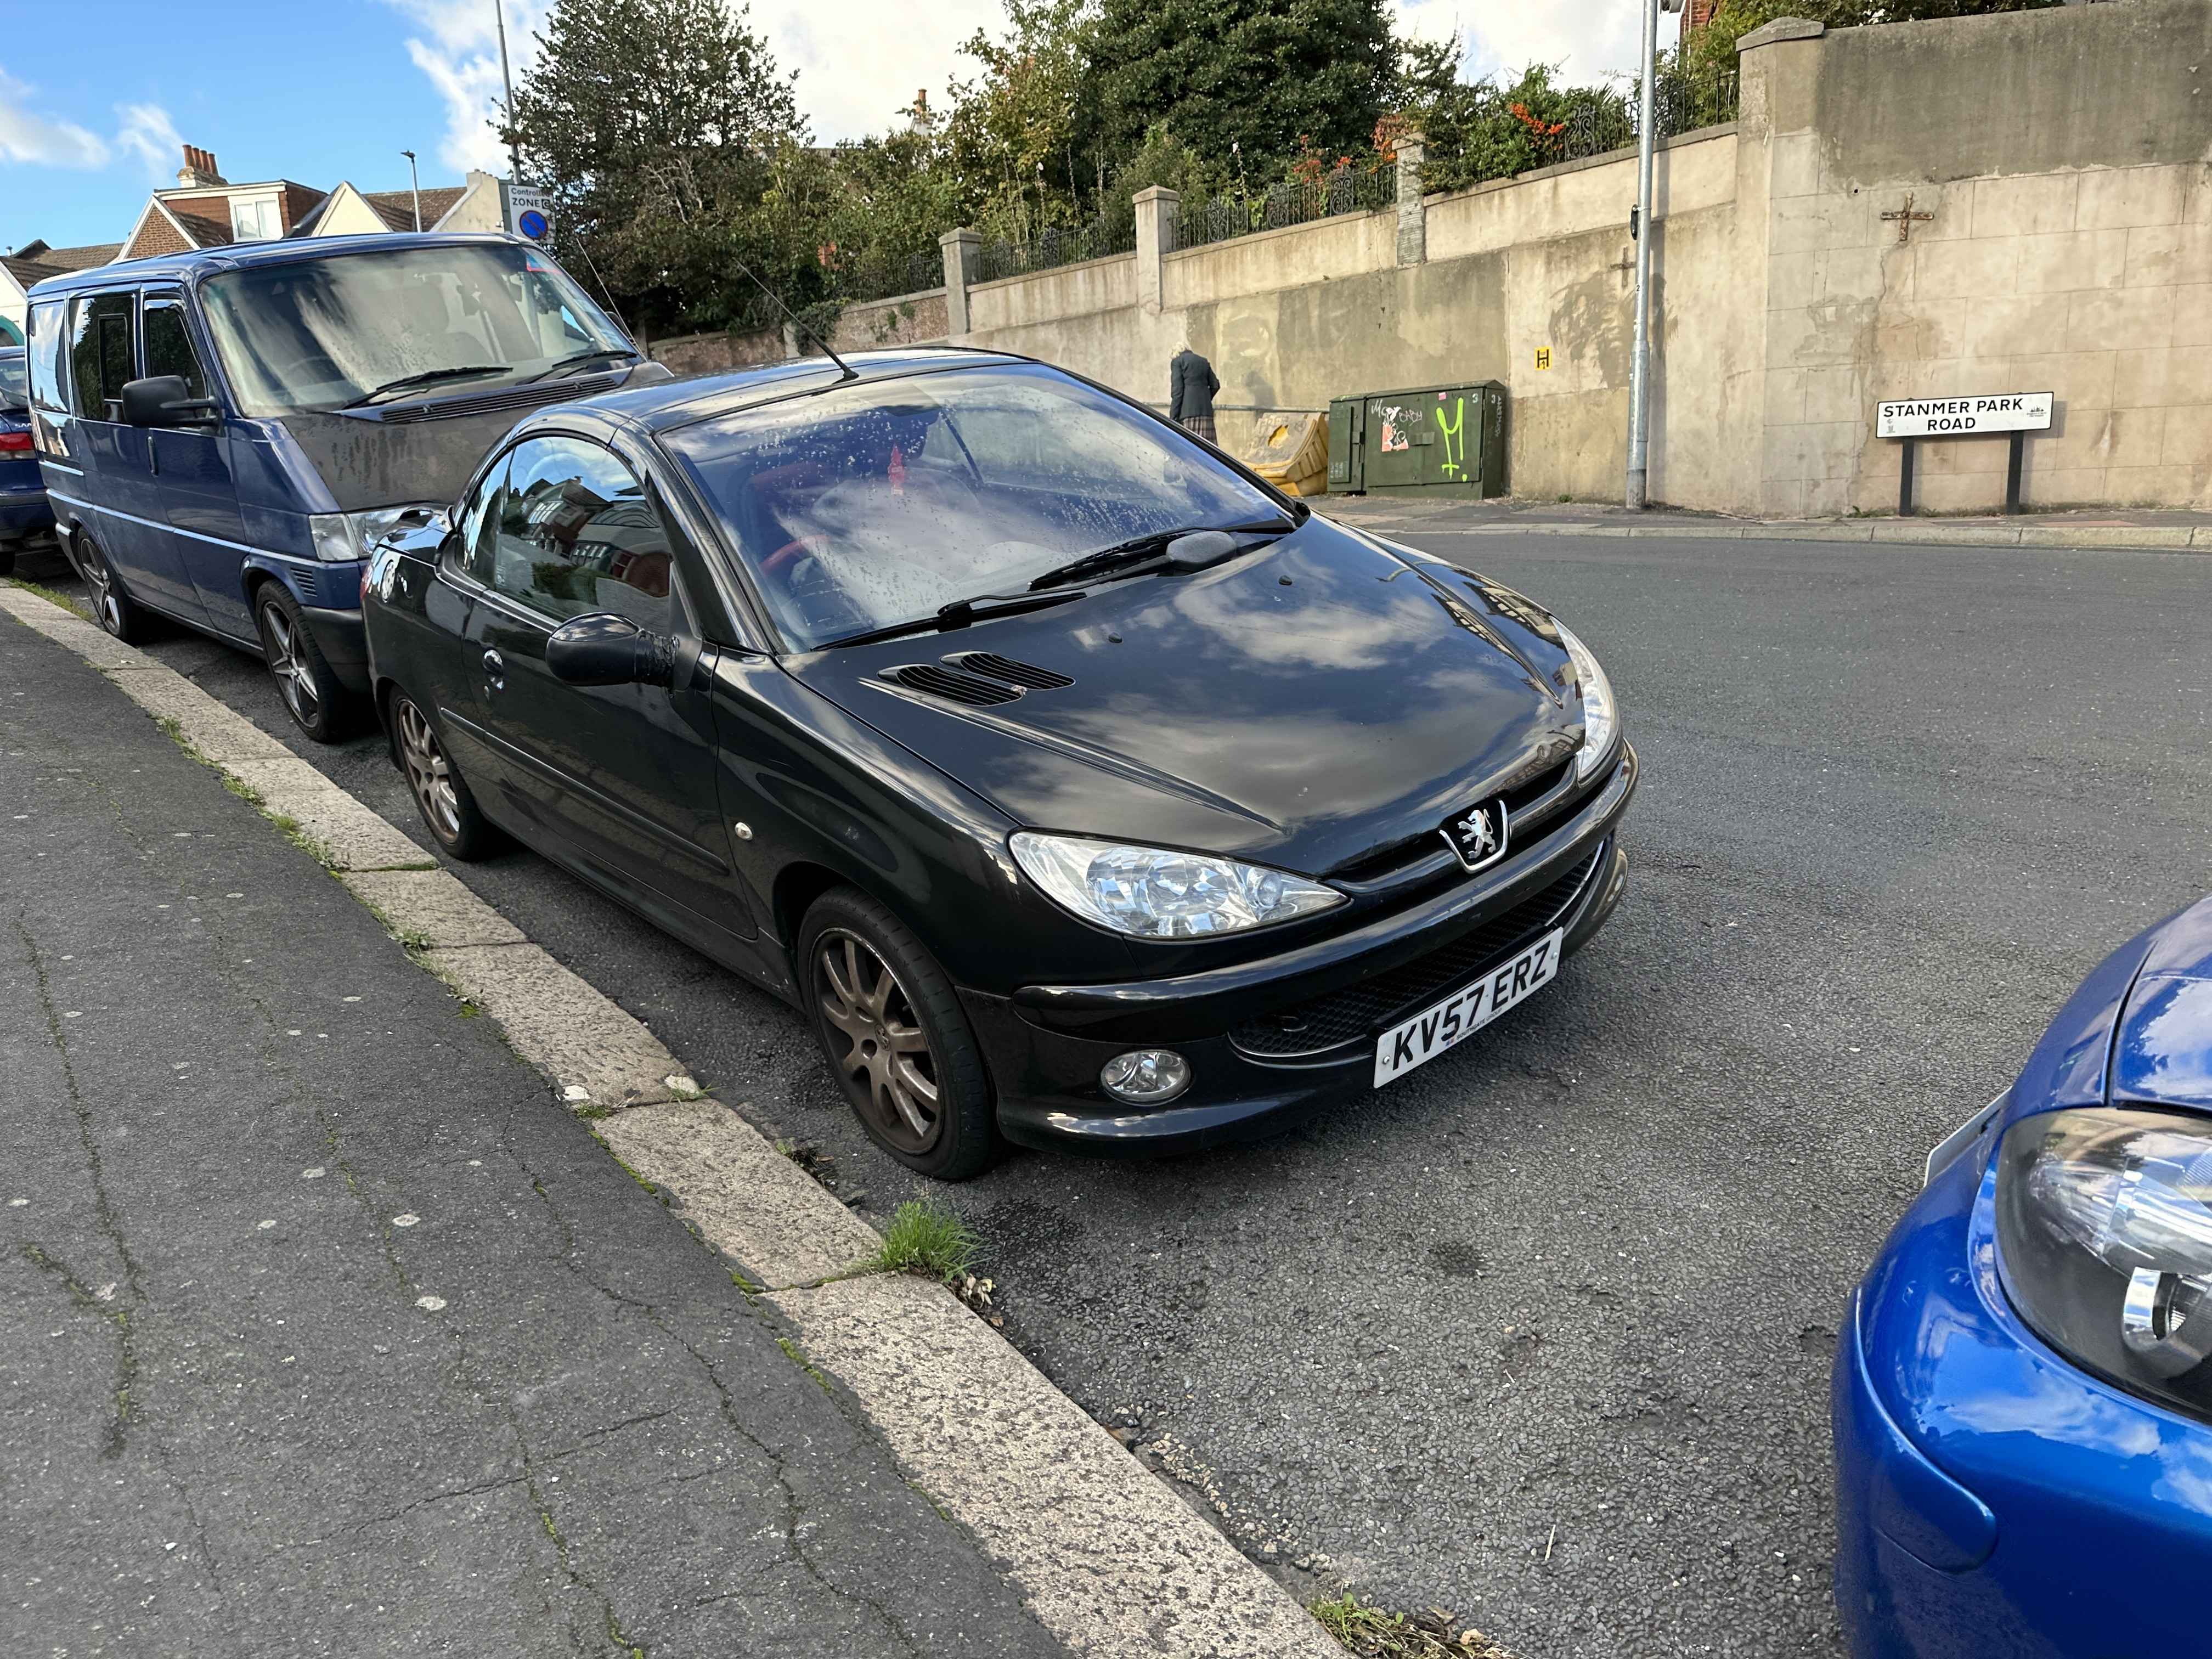 Photograph of KV57 ERZ - a Black Peugeot 206 parked in Hollingdean by a non-resident. The sixth of eight photographs supplied by the residents of Hollingdean.